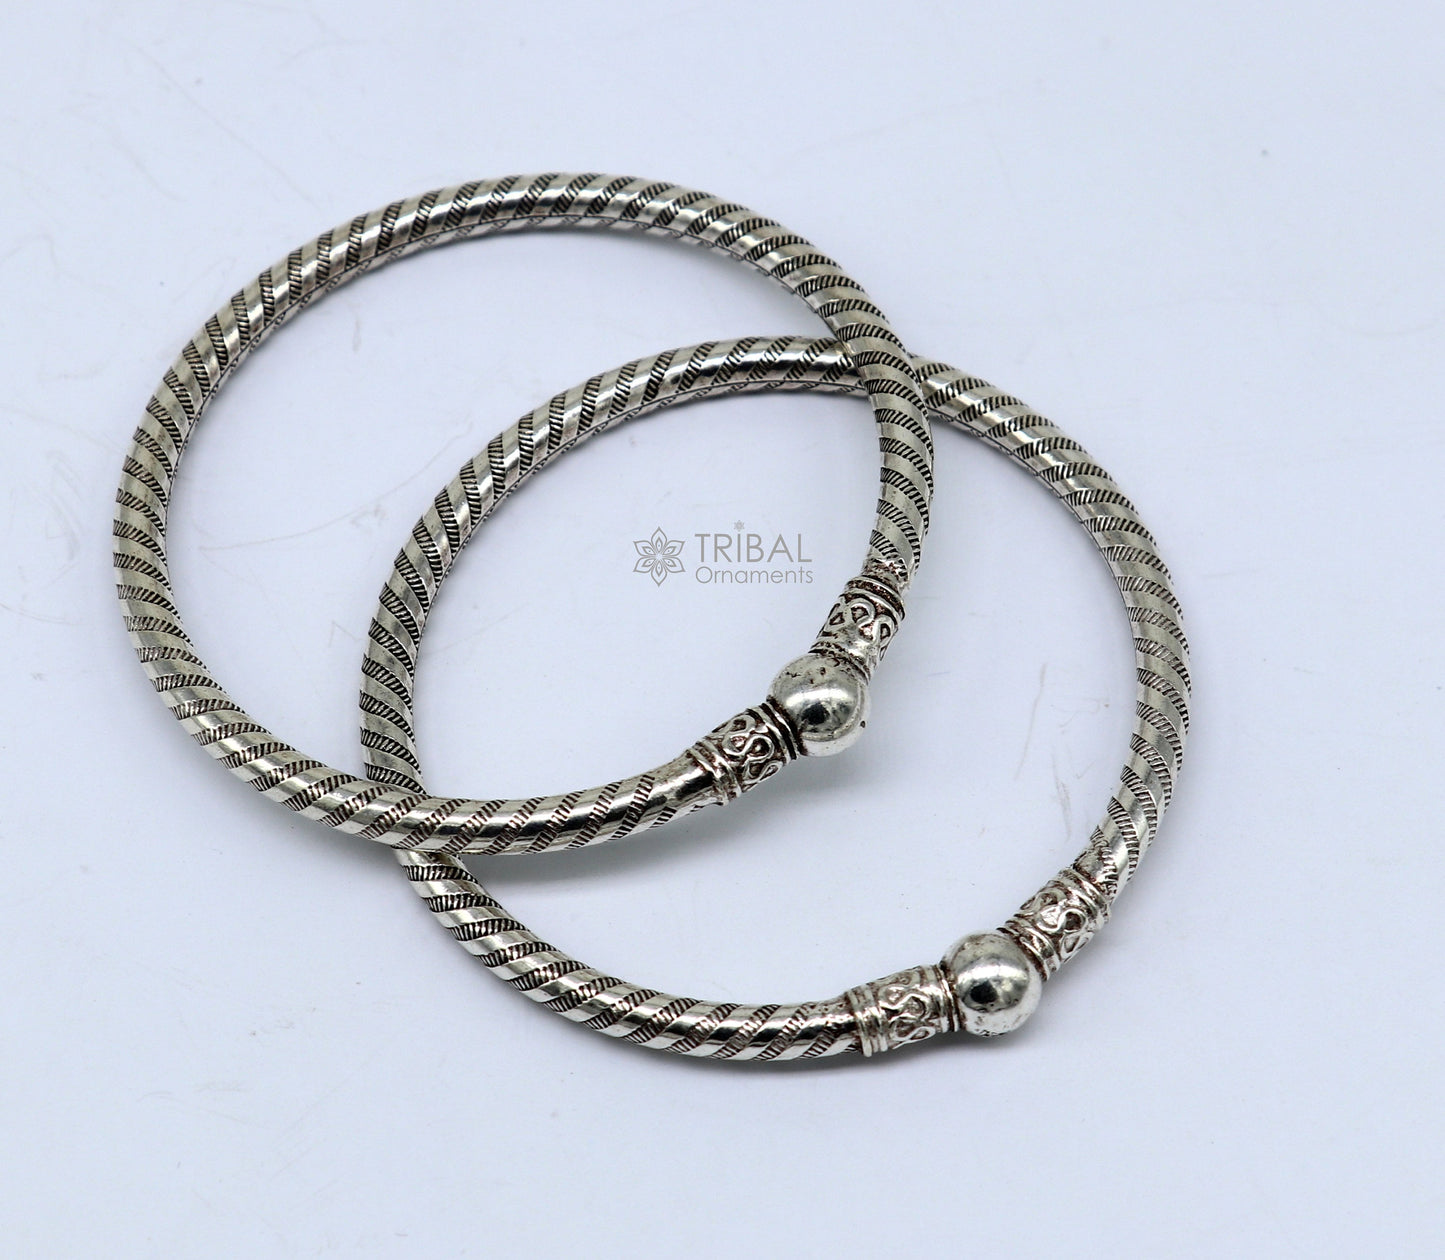 925 sterling silver handmade unique cultural design trendy kada bracelet for men's and girl's, best delicate Light weight jewelry nsk666 - TRIBAL ORNAMENTS